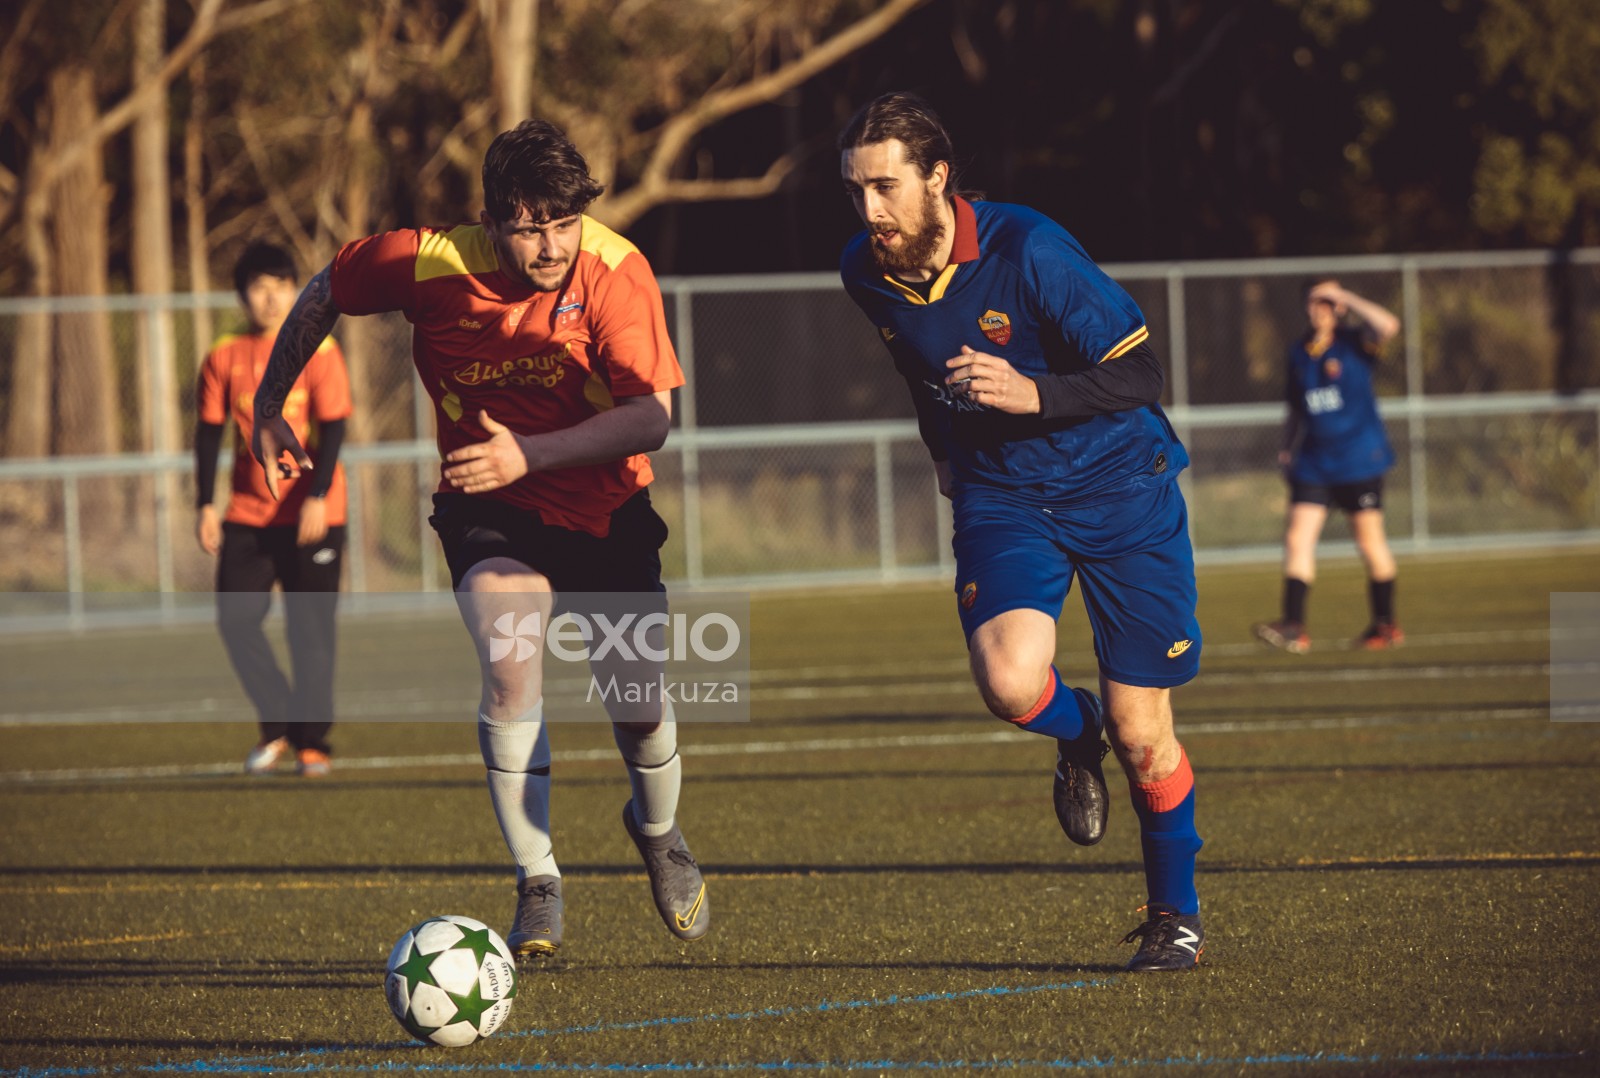 Soccer player racing to reach the ball - Sports Zone sunday league